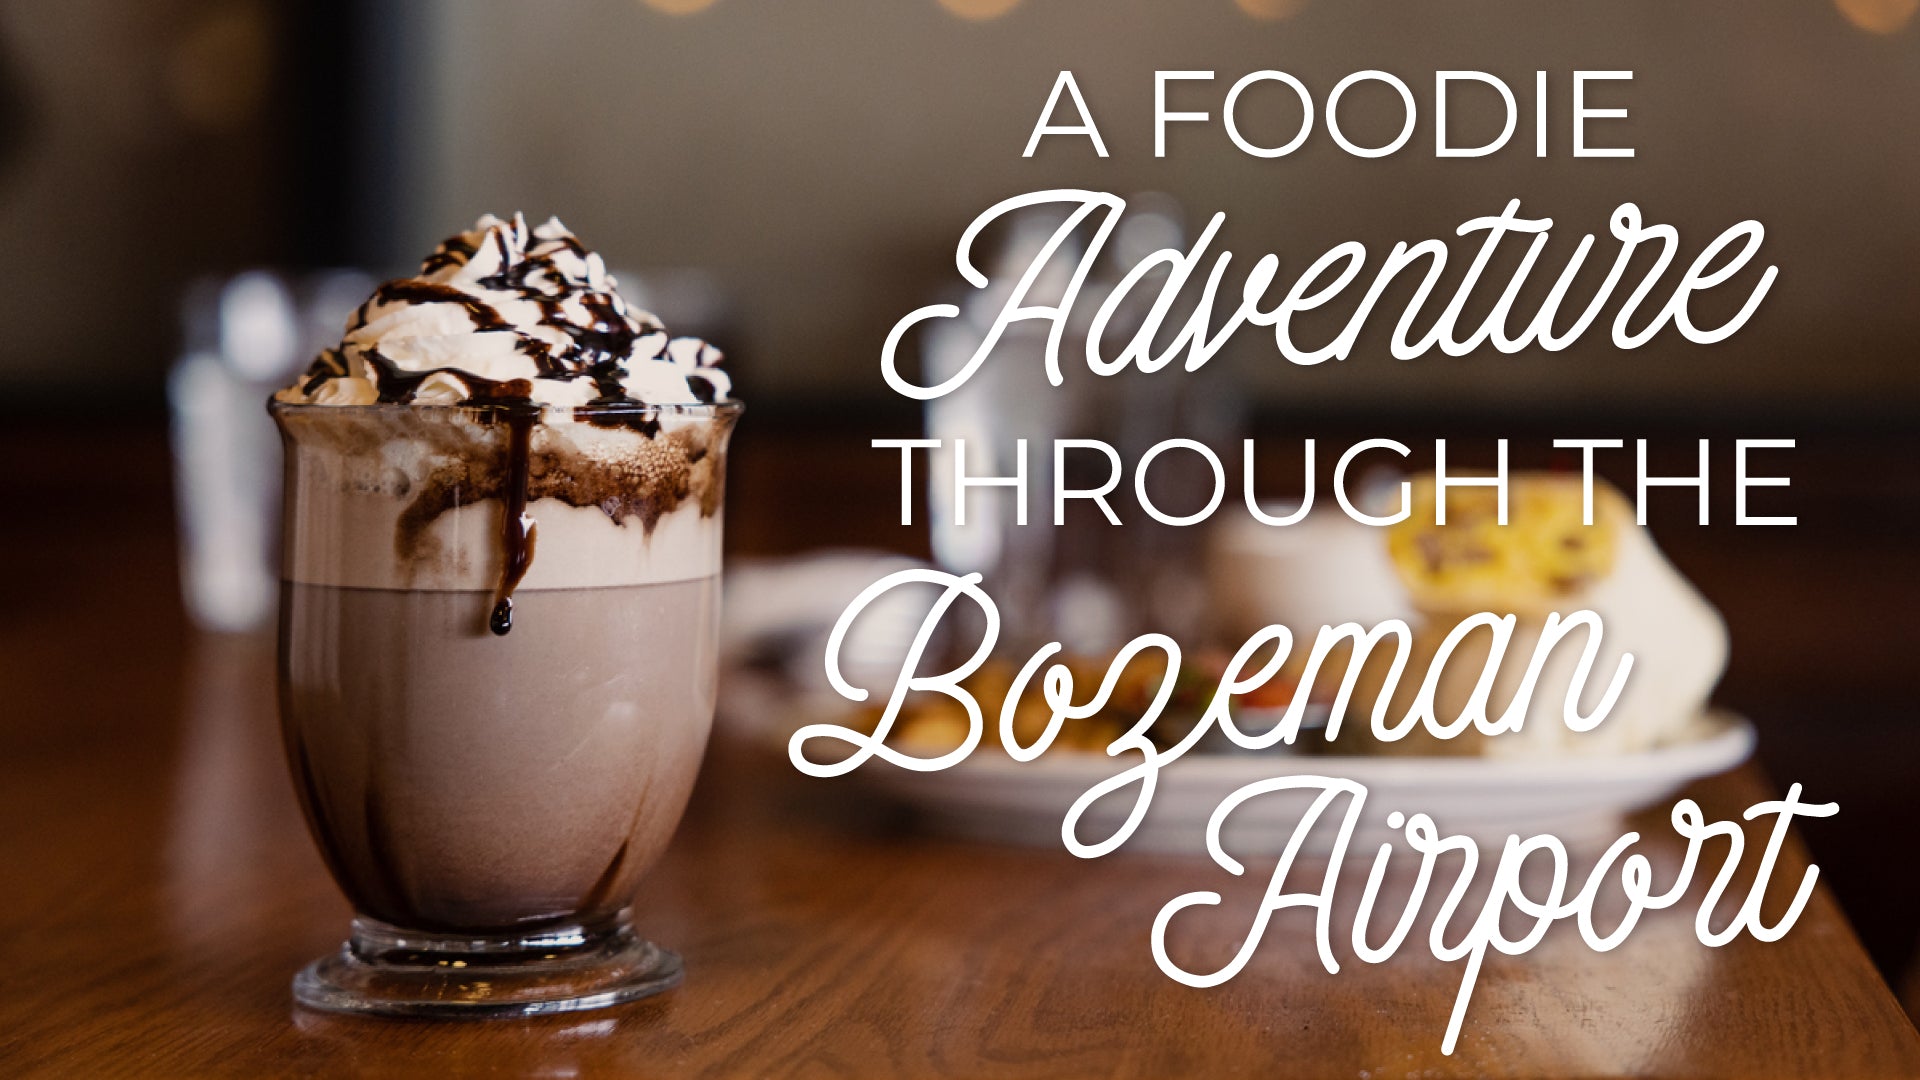 A Foodie Adventure through the Bozeman Airport!